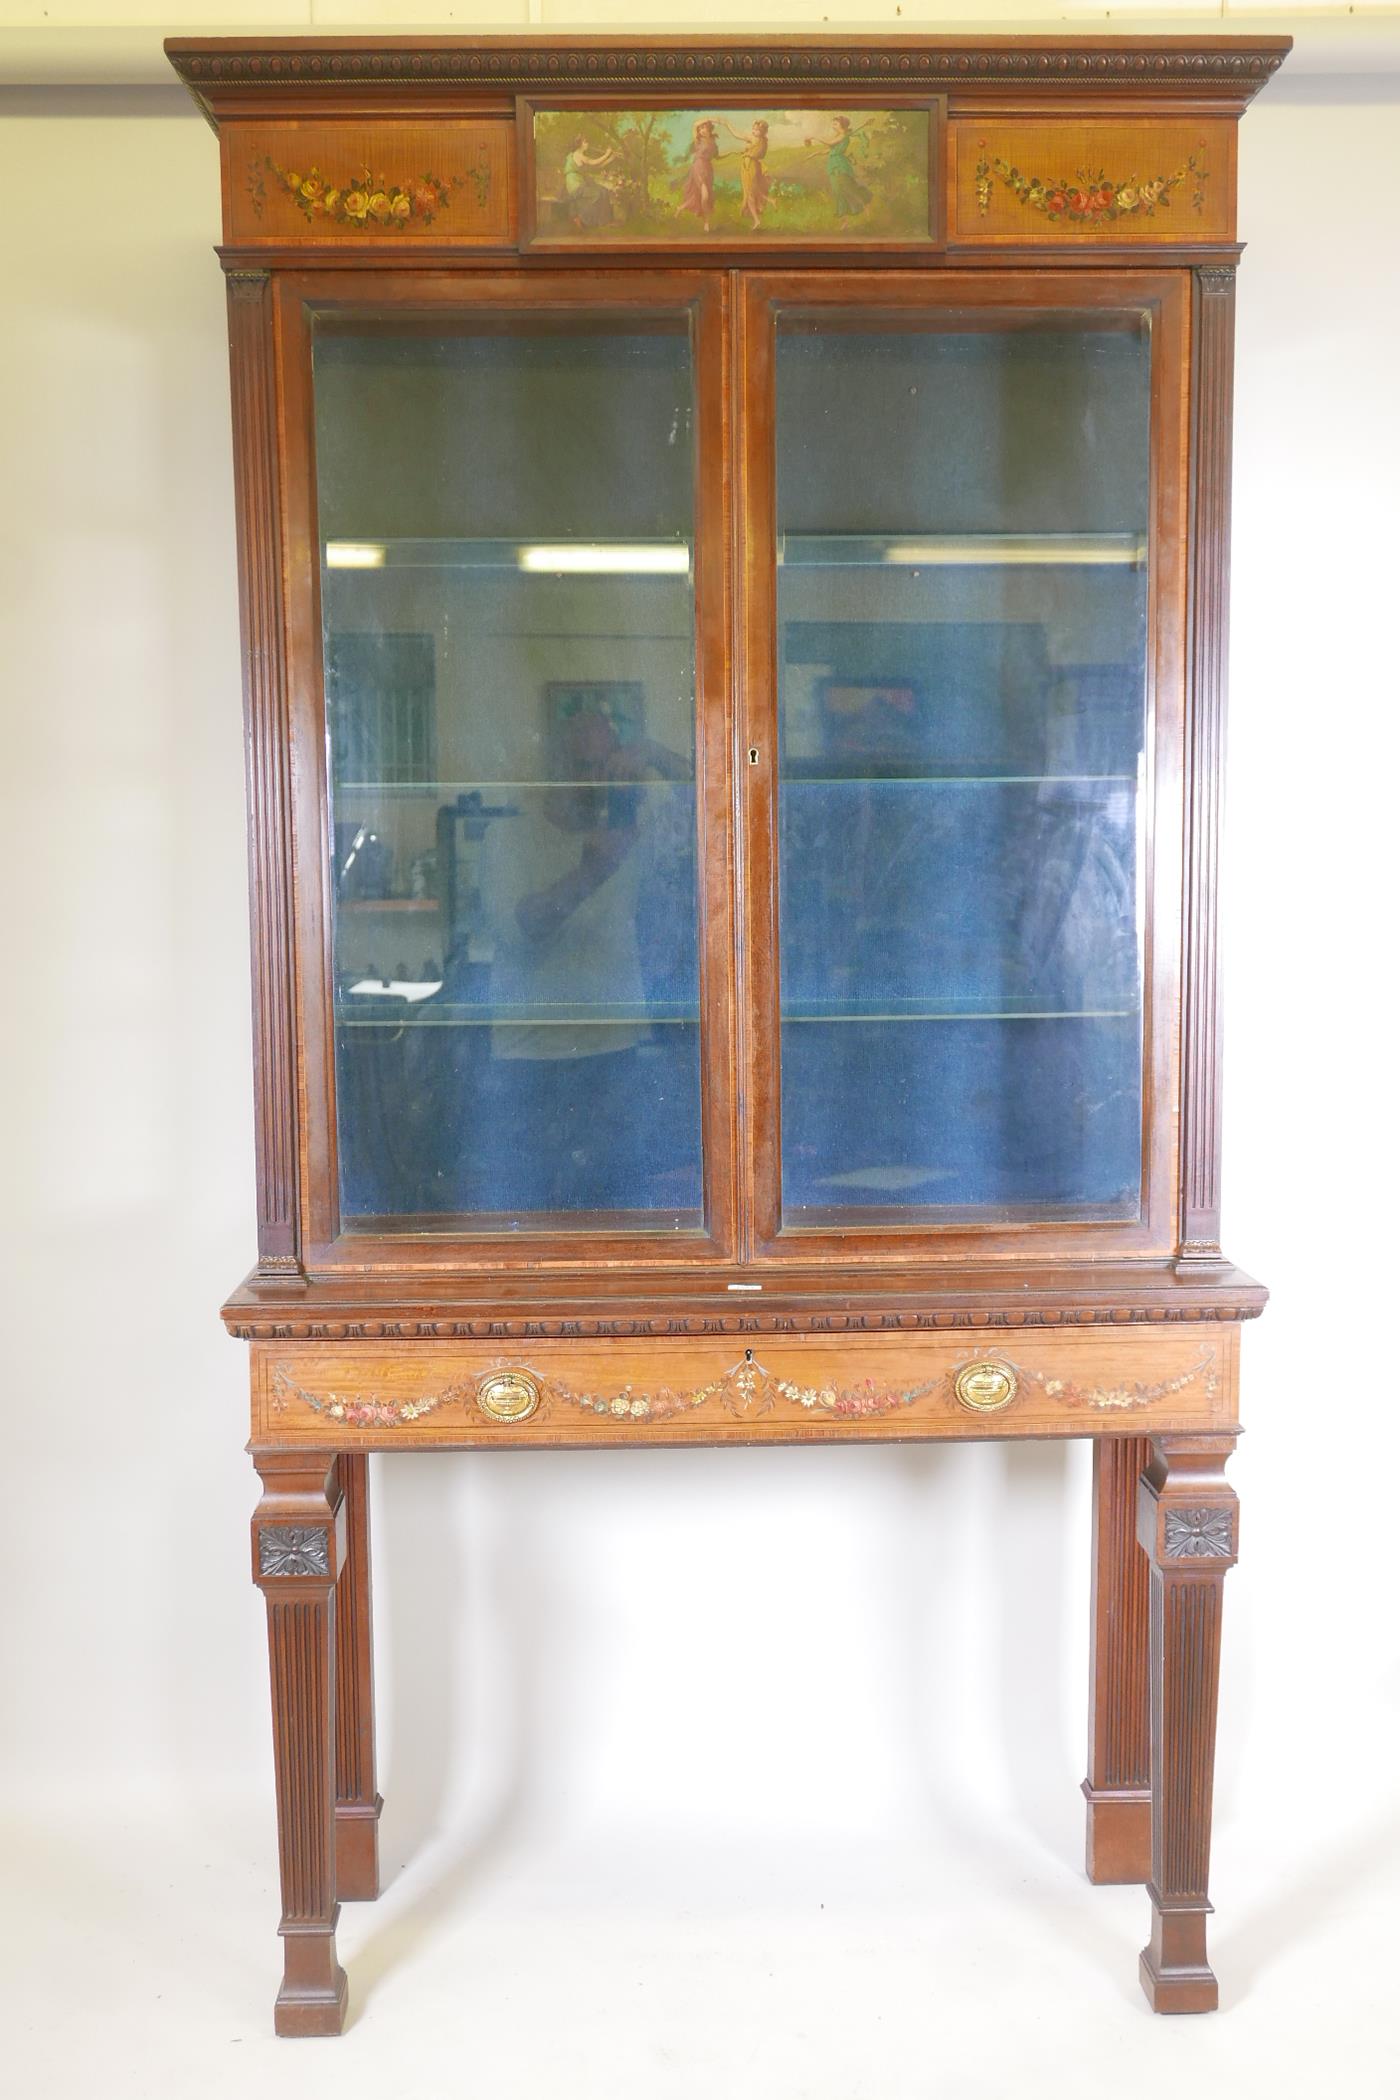 A C19th mahogany two section mahogany display cabinet, with satinwood banded inlay and painted